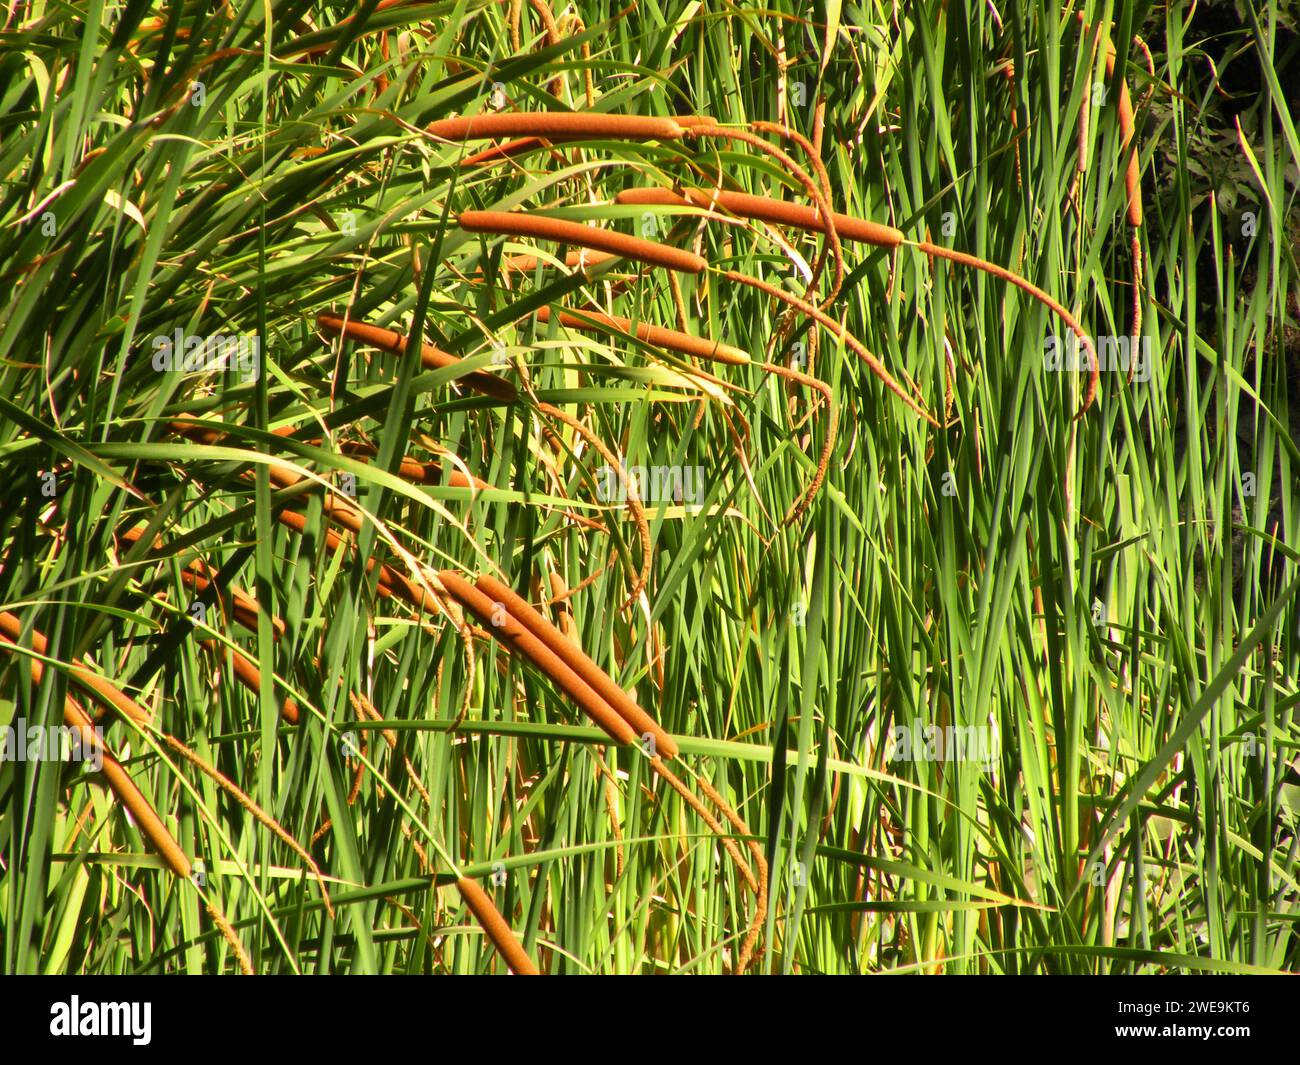 Cattail (Typha domingensis) growing in water. Stock Photo